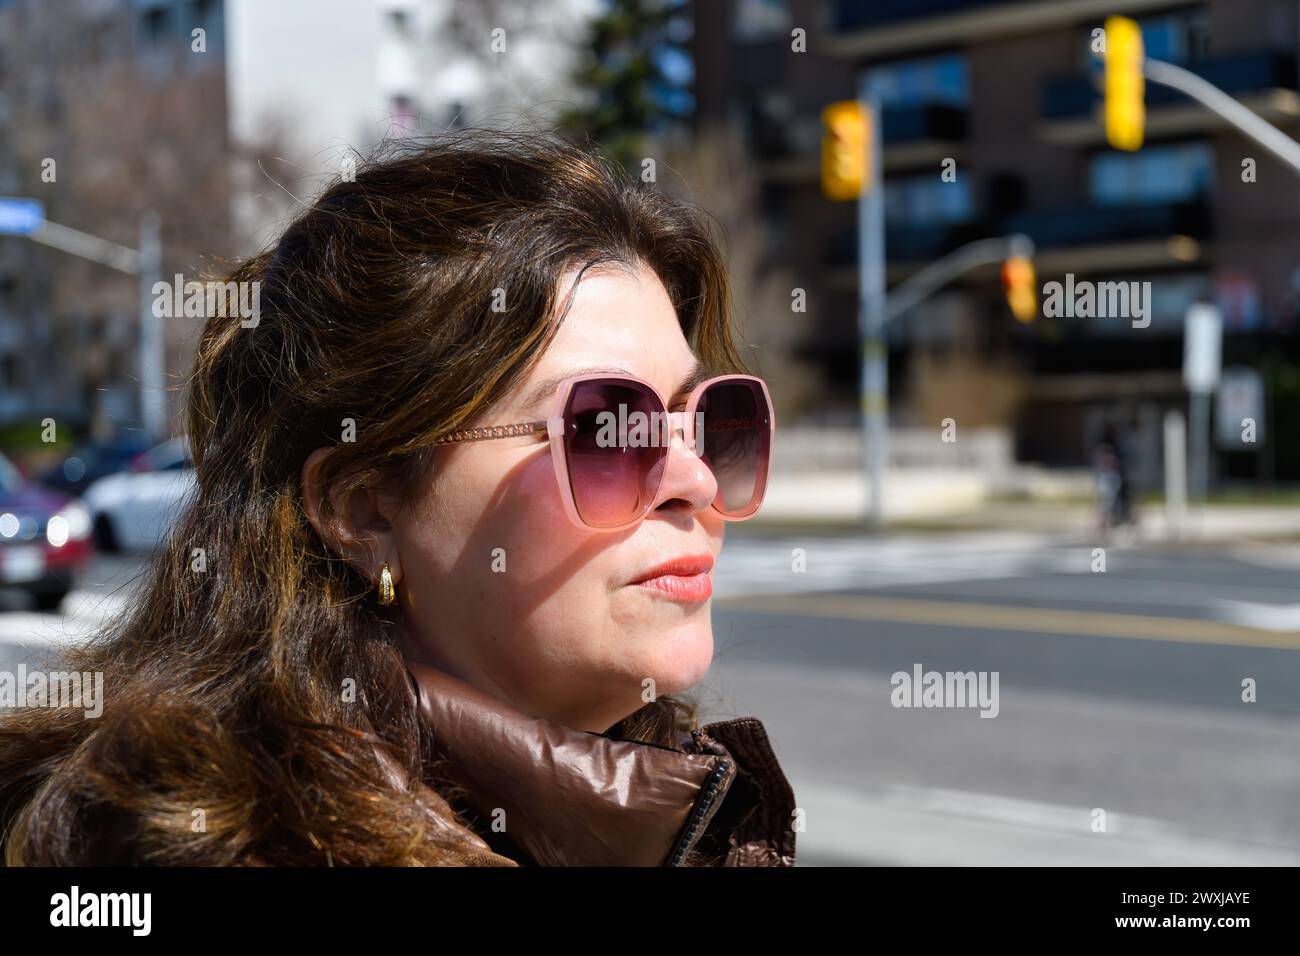 Portrait of a real Latin American woman on a city street, Toronto, Canada Stock Photo